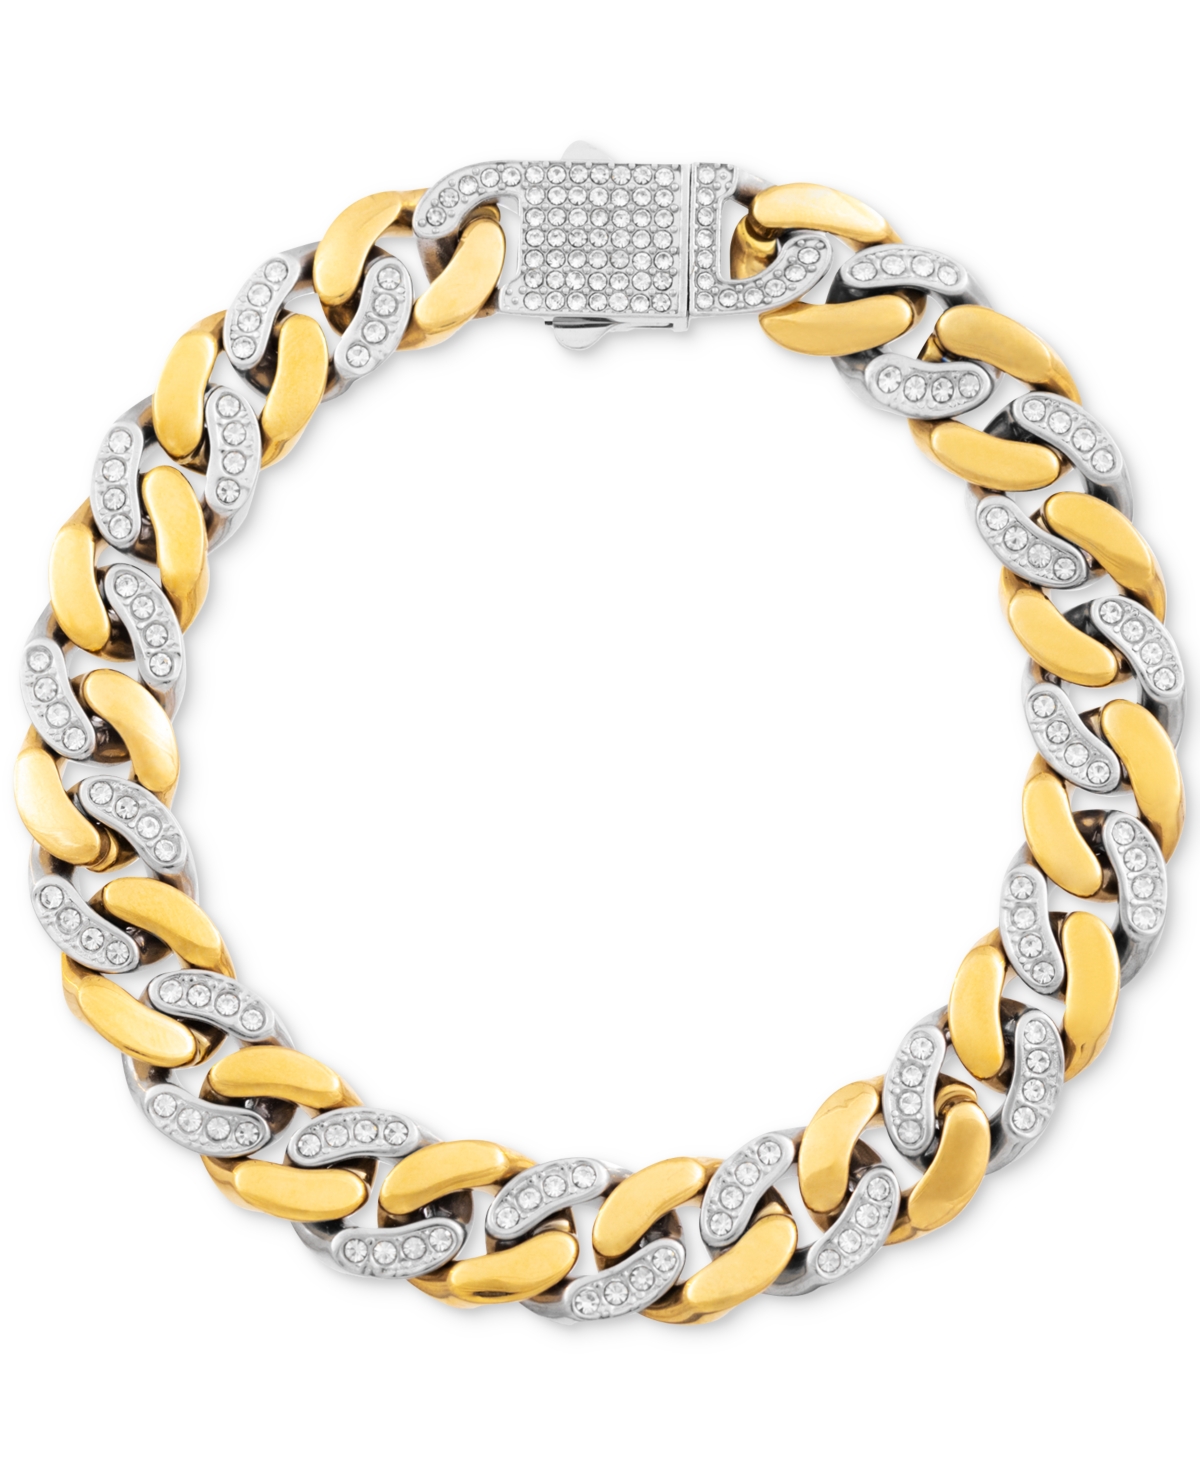 Smith Men's Crystal Curb Link Bracelet in Stainless Steel & Gold-Tone Ion-Plate - Gold-Tone